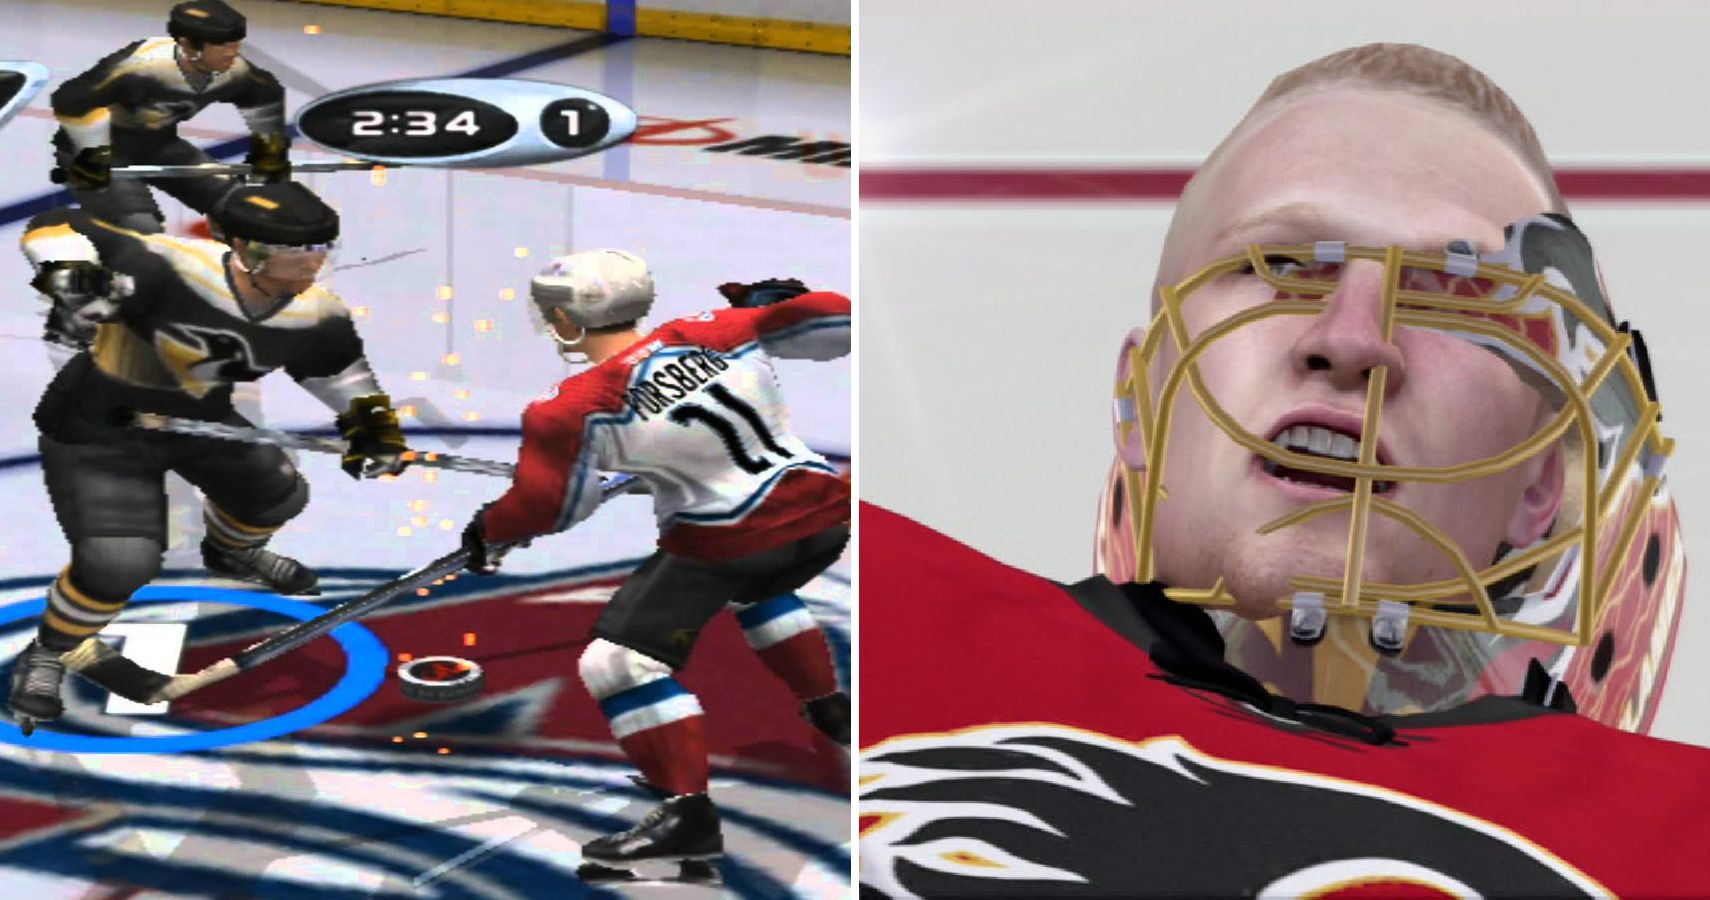 NHL and Roblox Recreate Stanley Cup Final Goals - The Hockey News